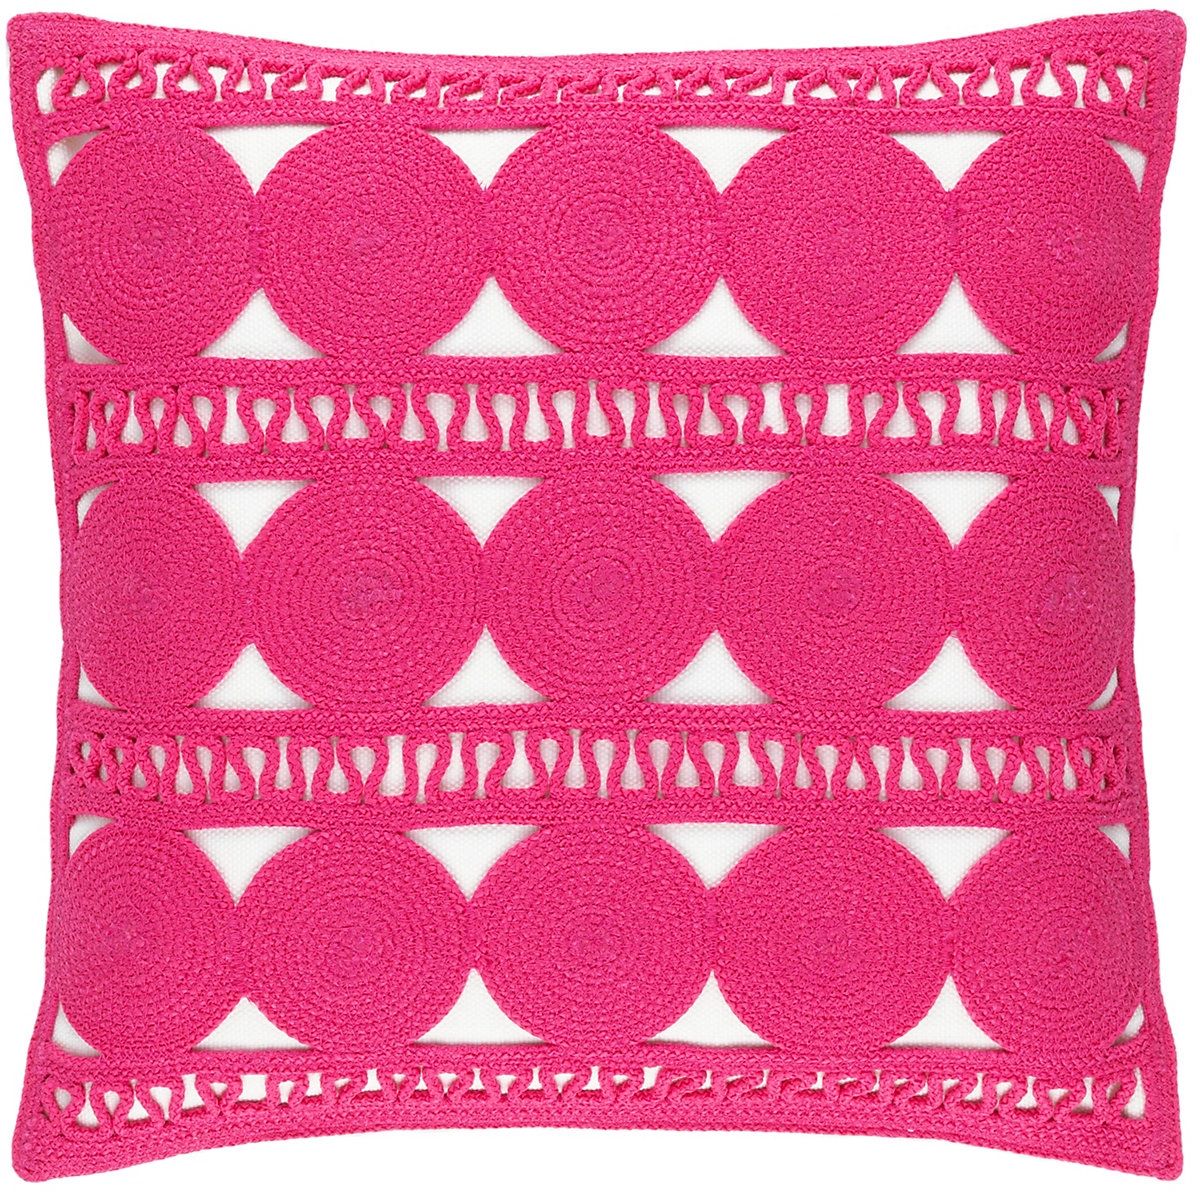 Round Turn Fuchsia Indoor/Outdoor Decorative Pillow Cover | Annie Selke